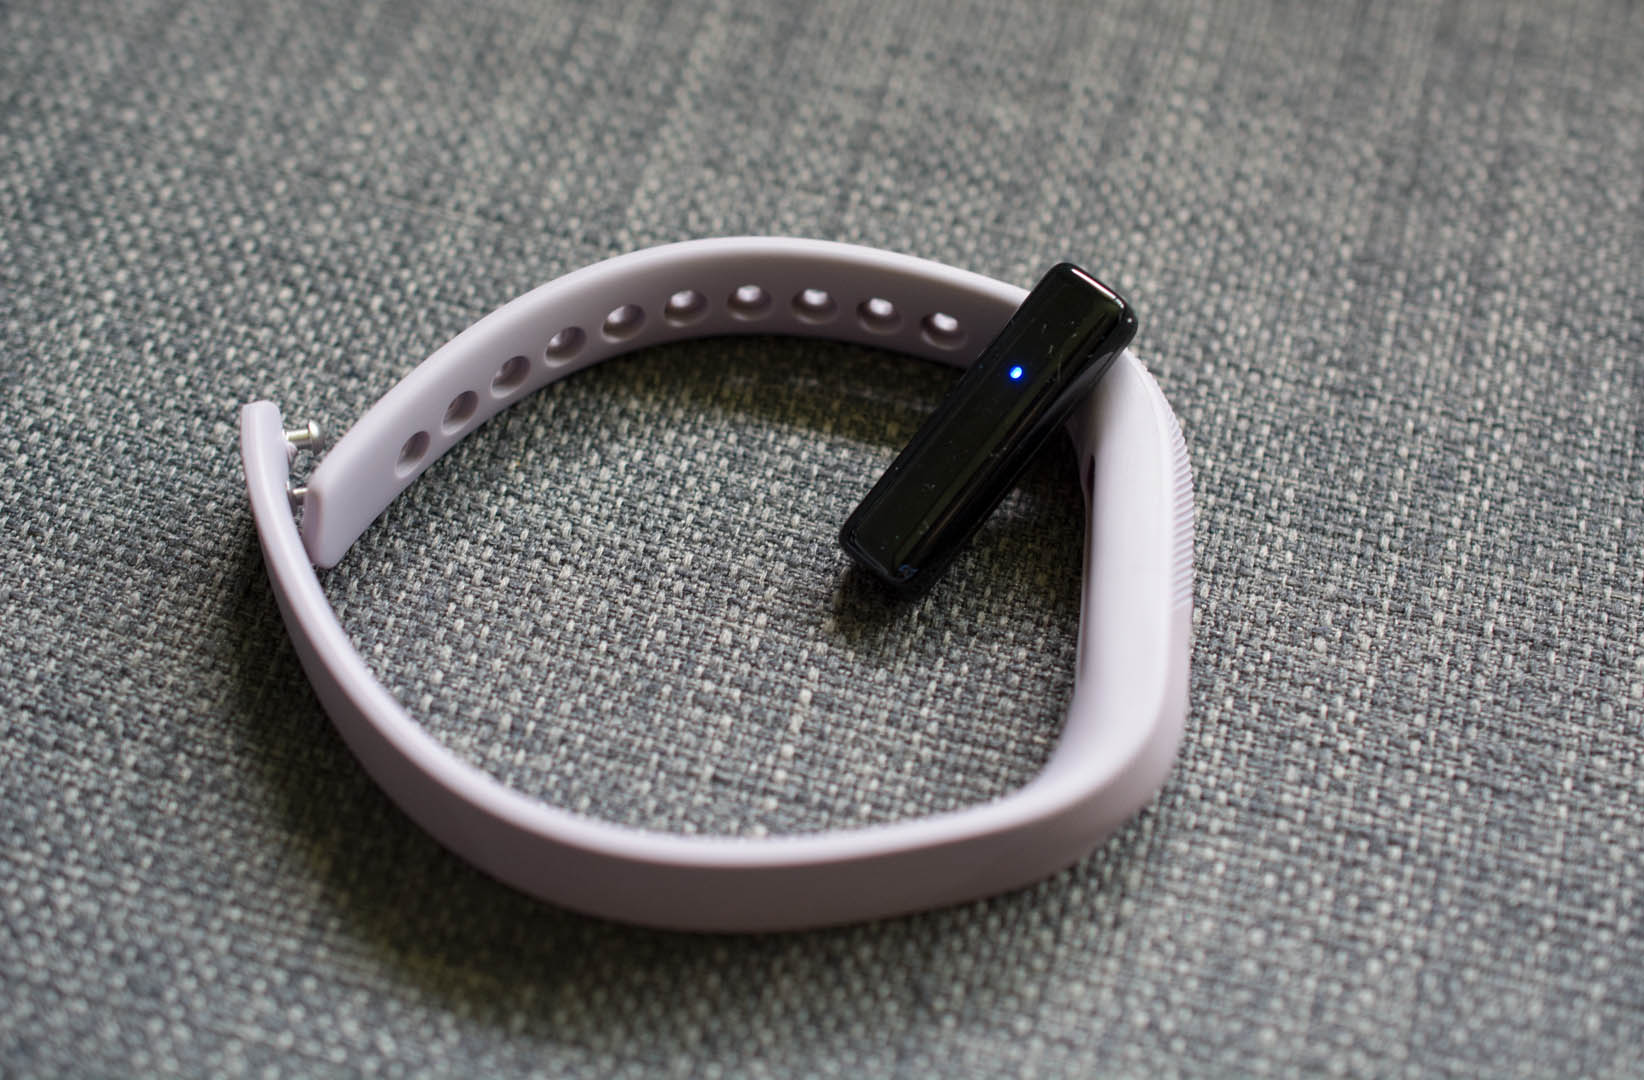 A Fitbit Flex 2 “exploded” on woman's 